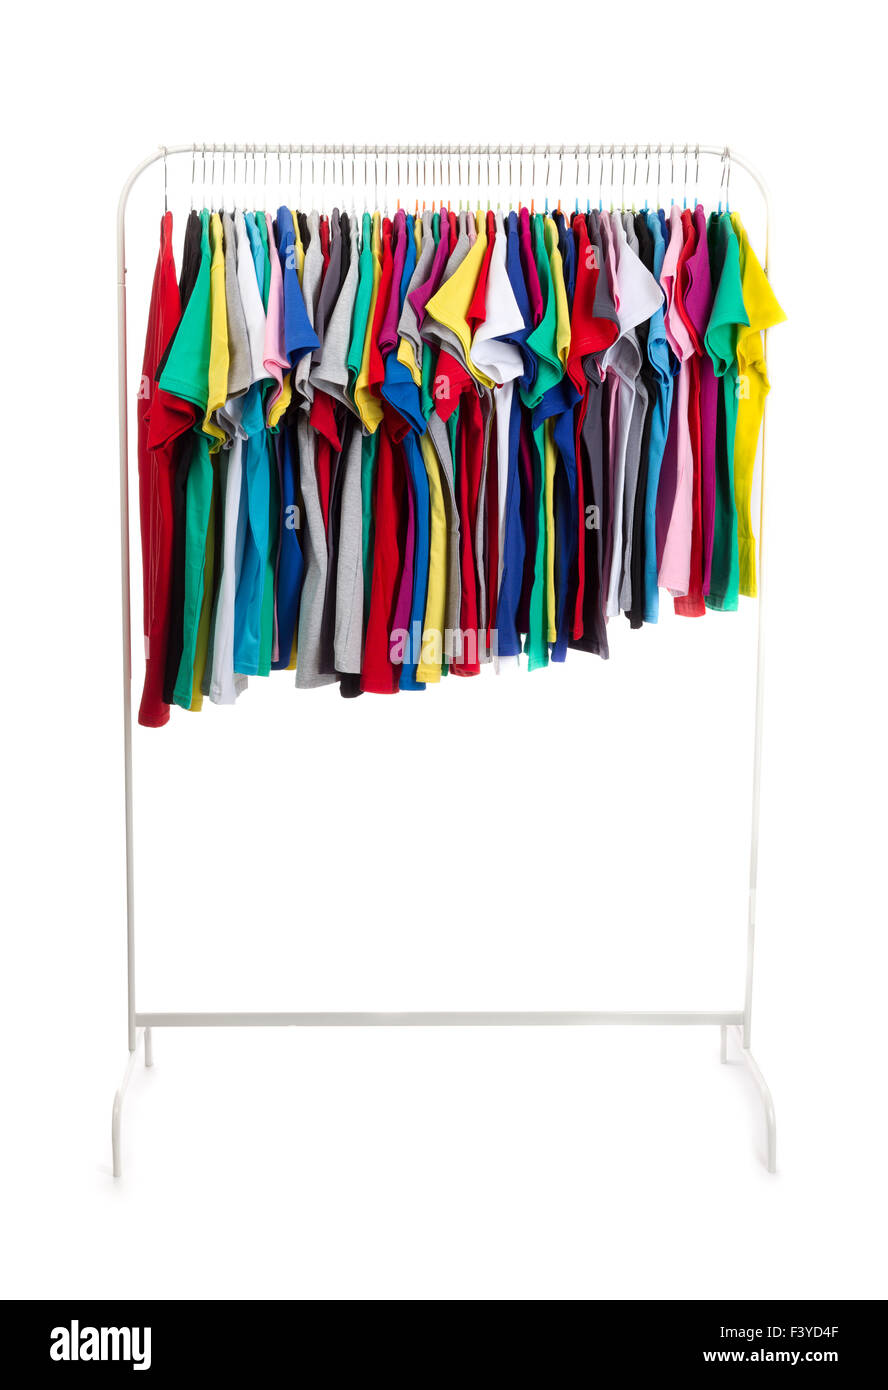 Multicolored clothes on hangers, isolate Stock Photo